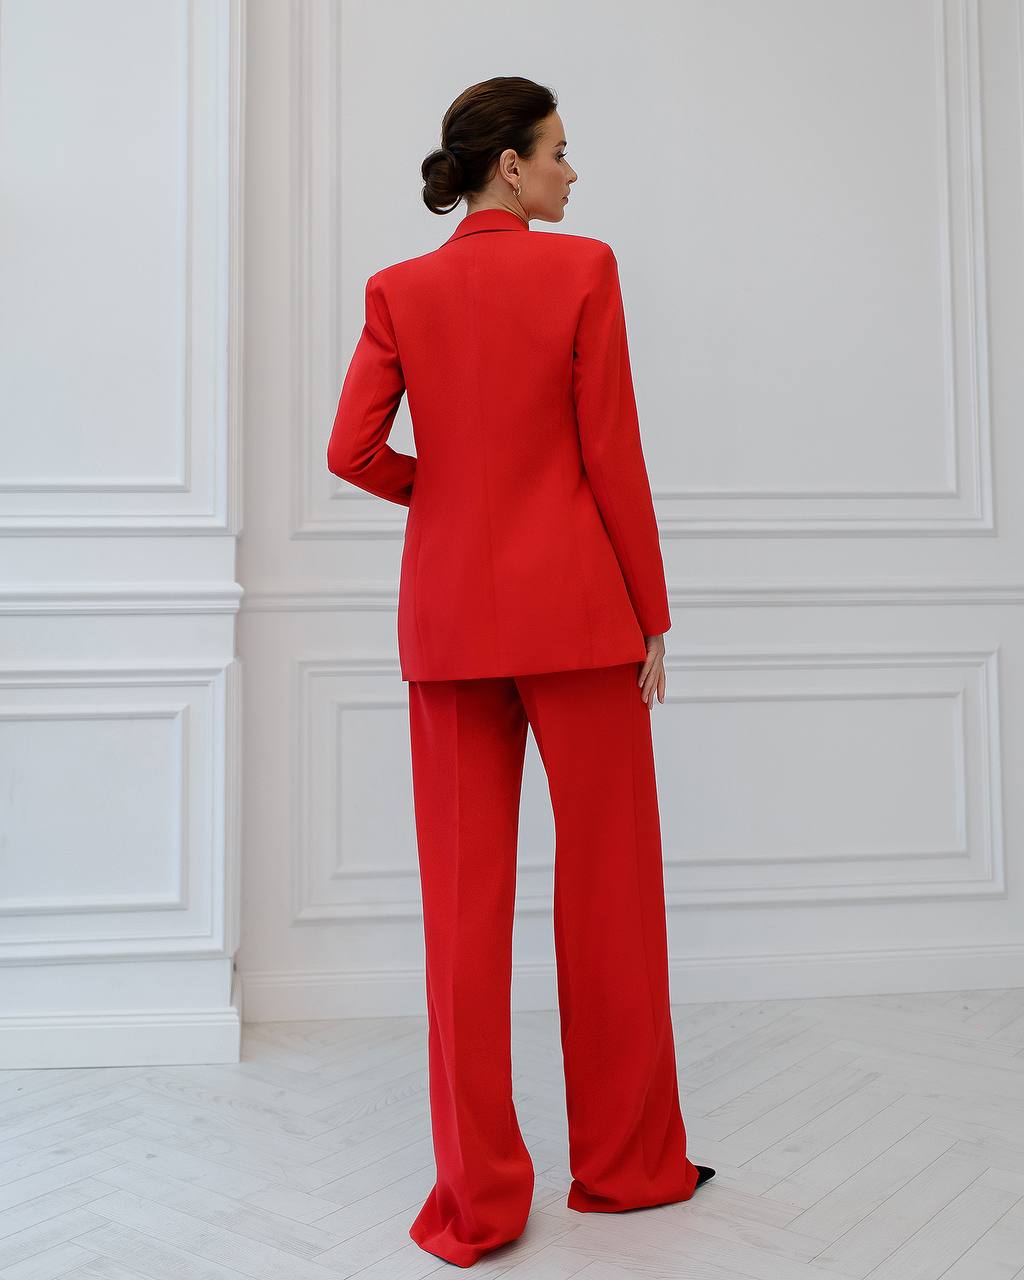 a woman in a red suit stands in a white room